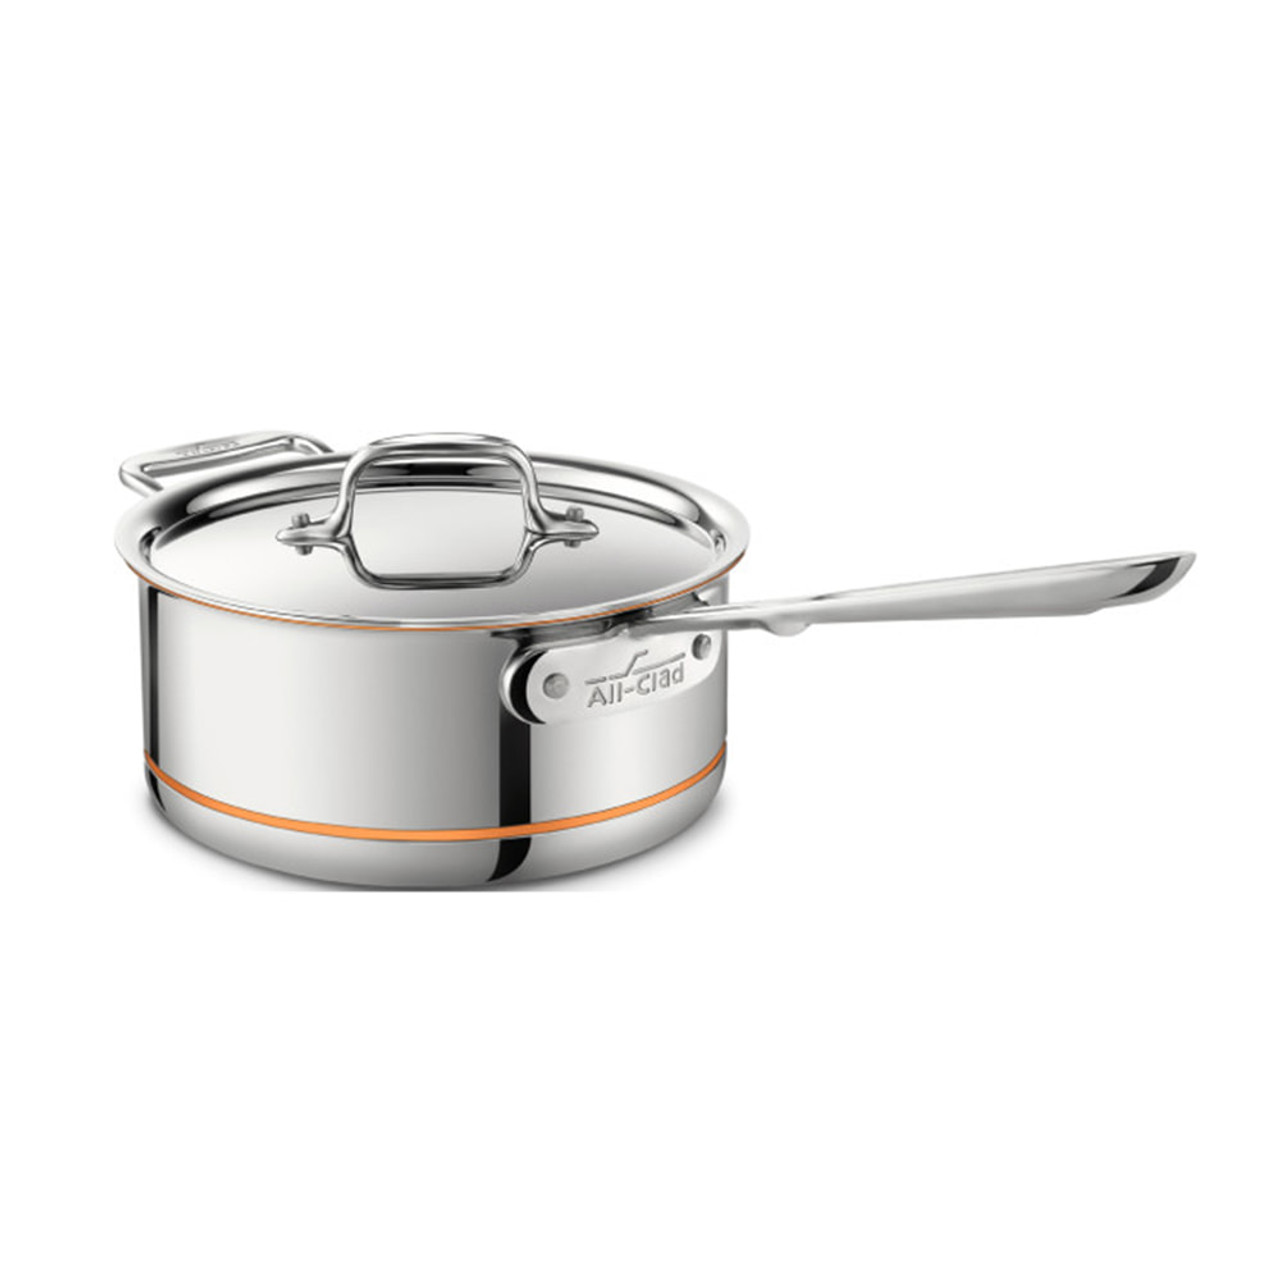 https://cdn11.bigcommerce.com/s-hccytny0od/images/stencil/1280x1280/products/507/1916/all-clad-copper-core-sauce-pan-3qt__34291.1511048199.jpg?c=2?imbypass=on